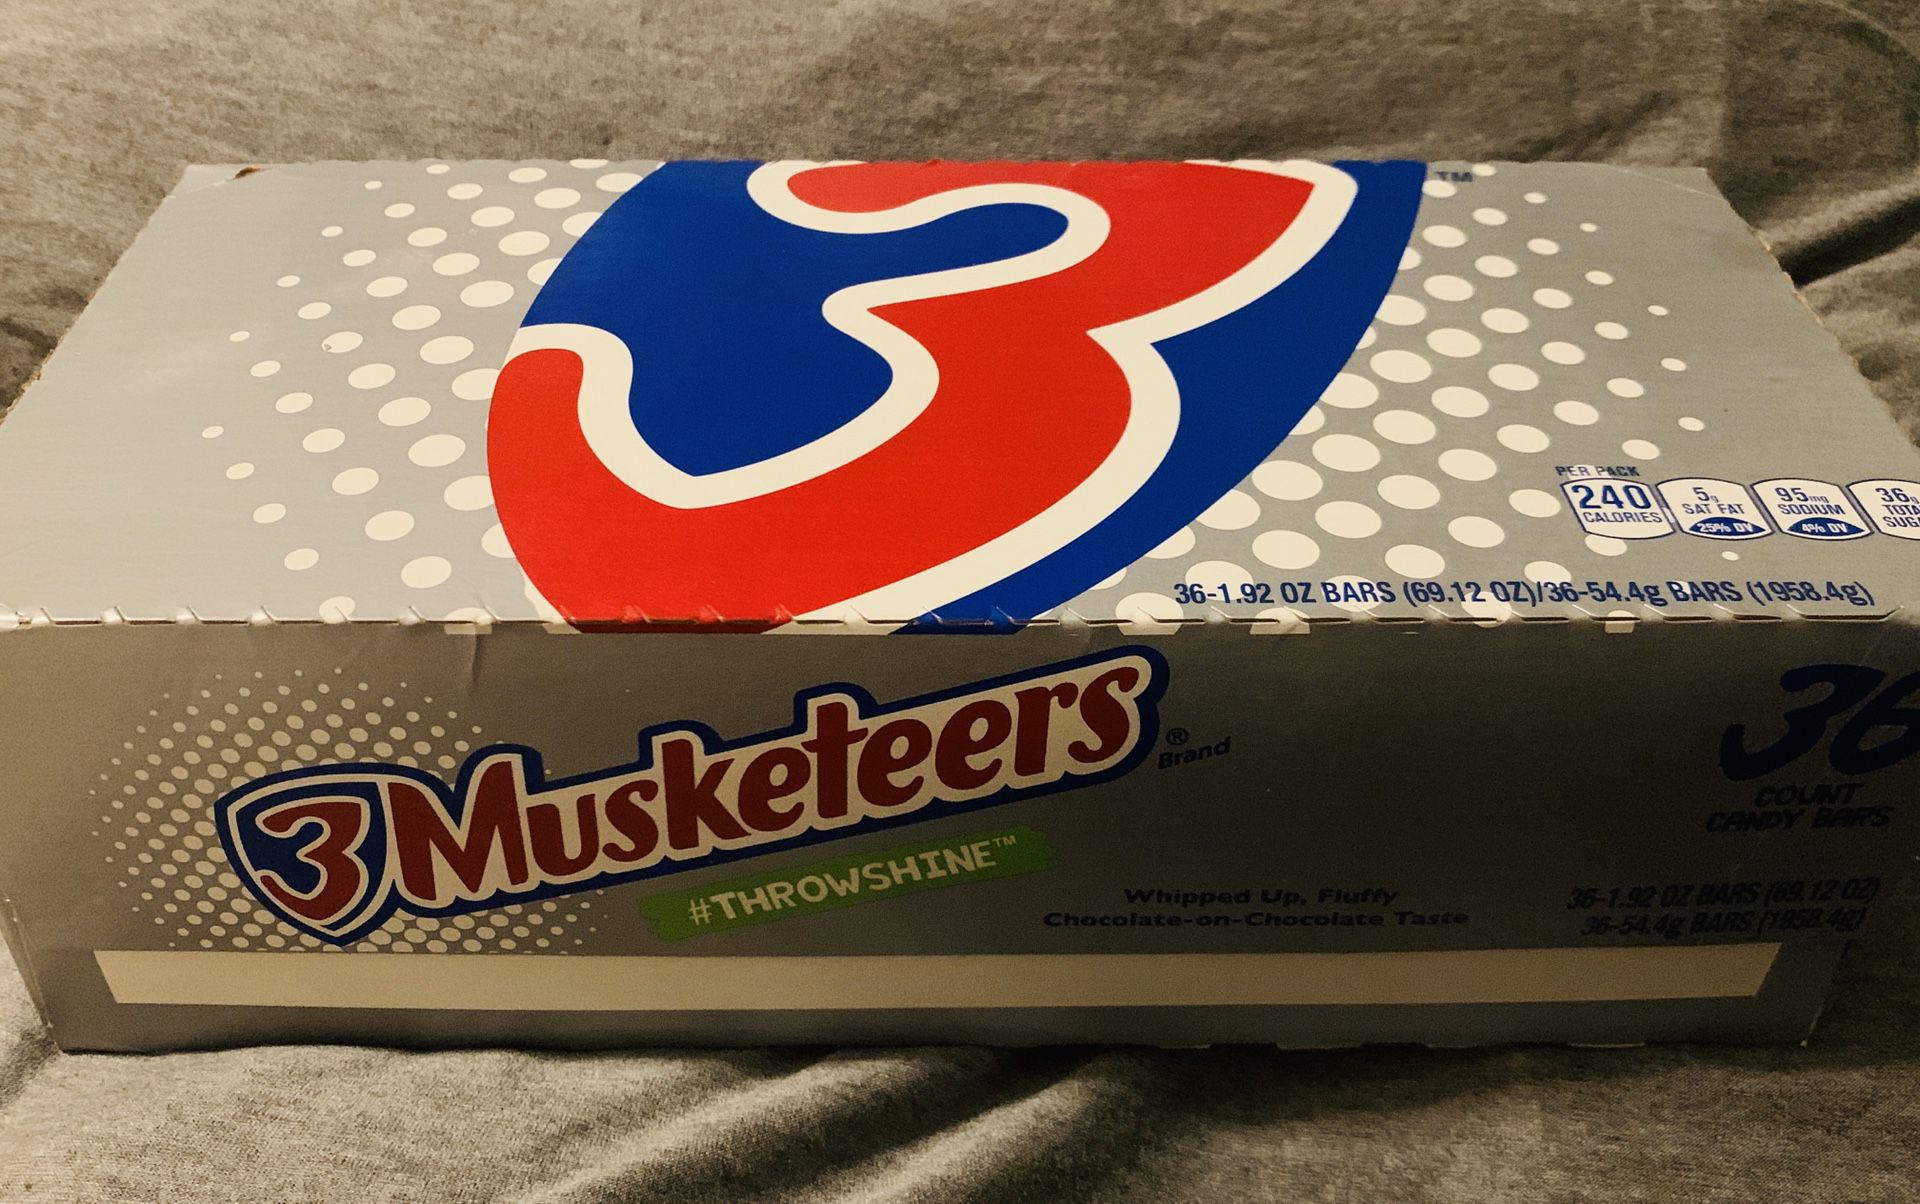 New box of 3 Musketeers (36 candy bars)